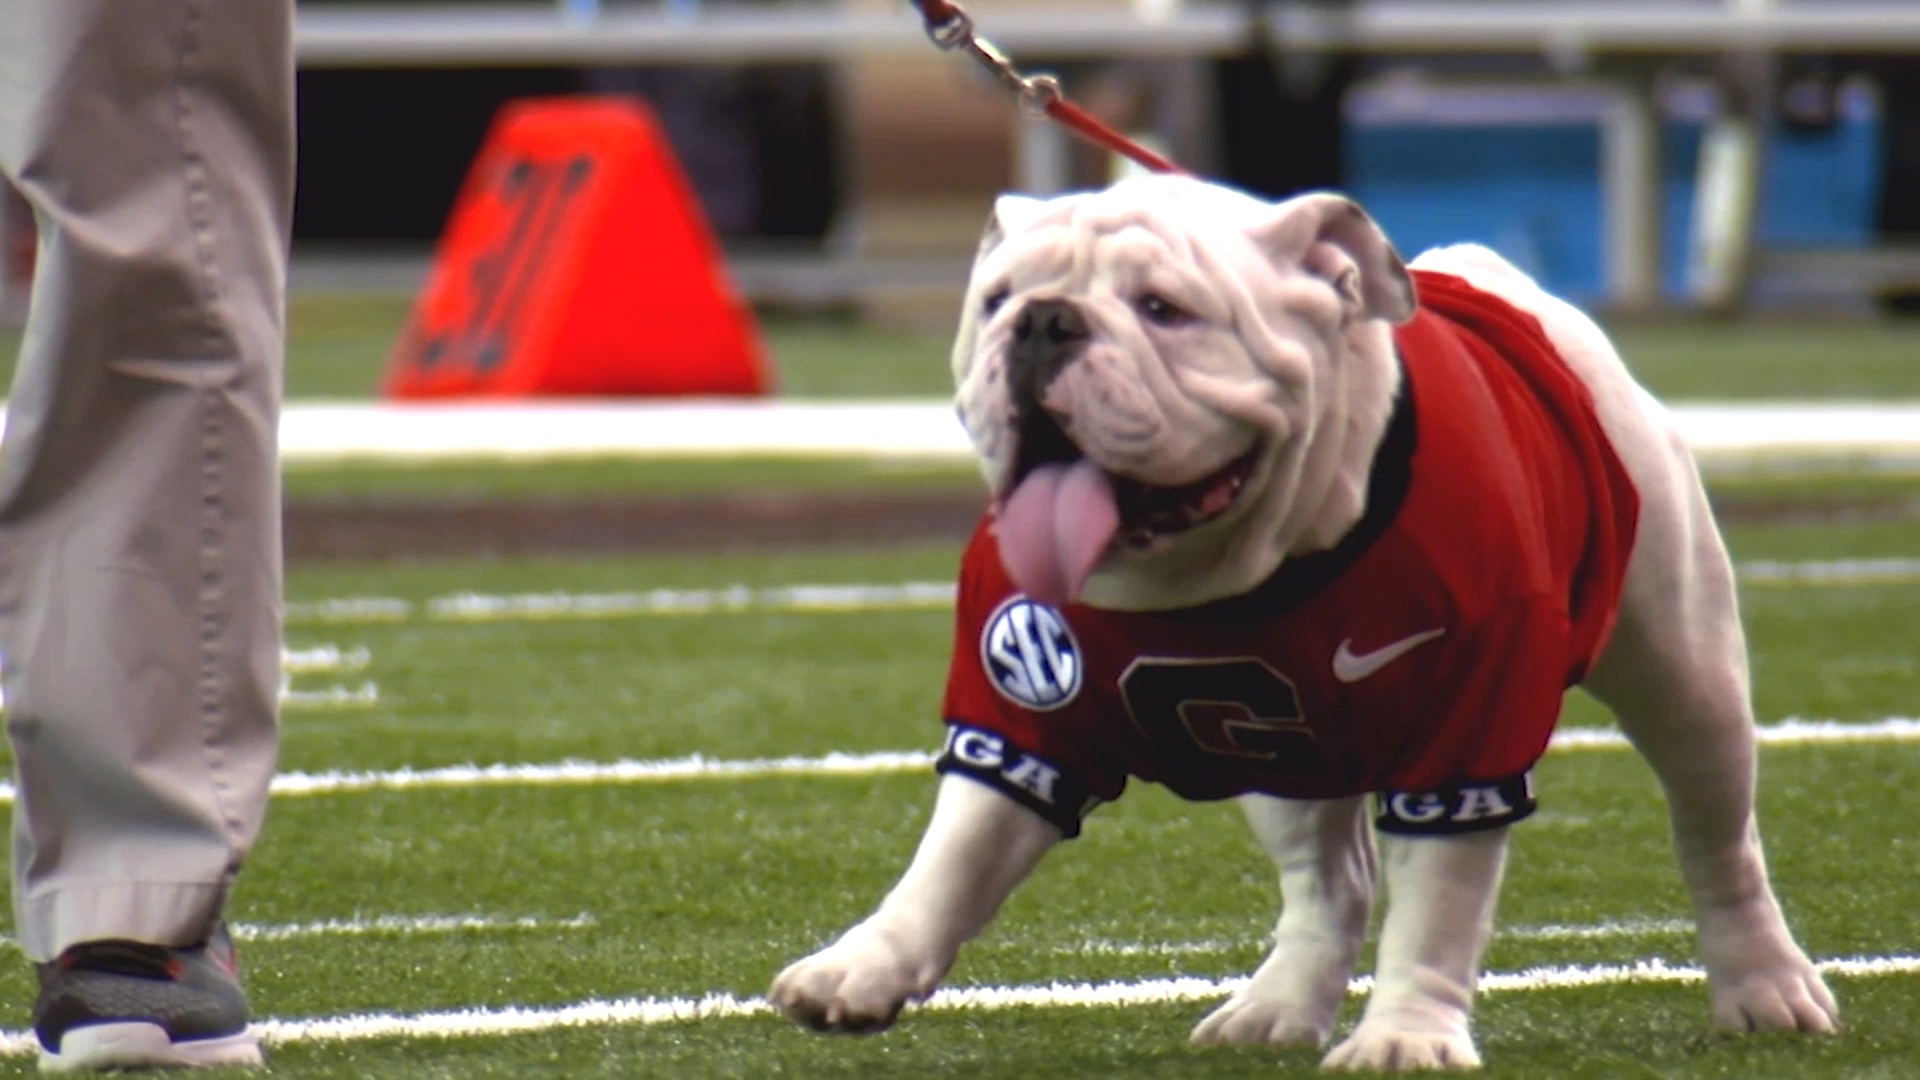 Georgia Bulldogs on X: Before we welcome Boom as Uga XI on Saturday, how  about one more round of applause for Que, who as Uga X, will retire as the  winningest mascot